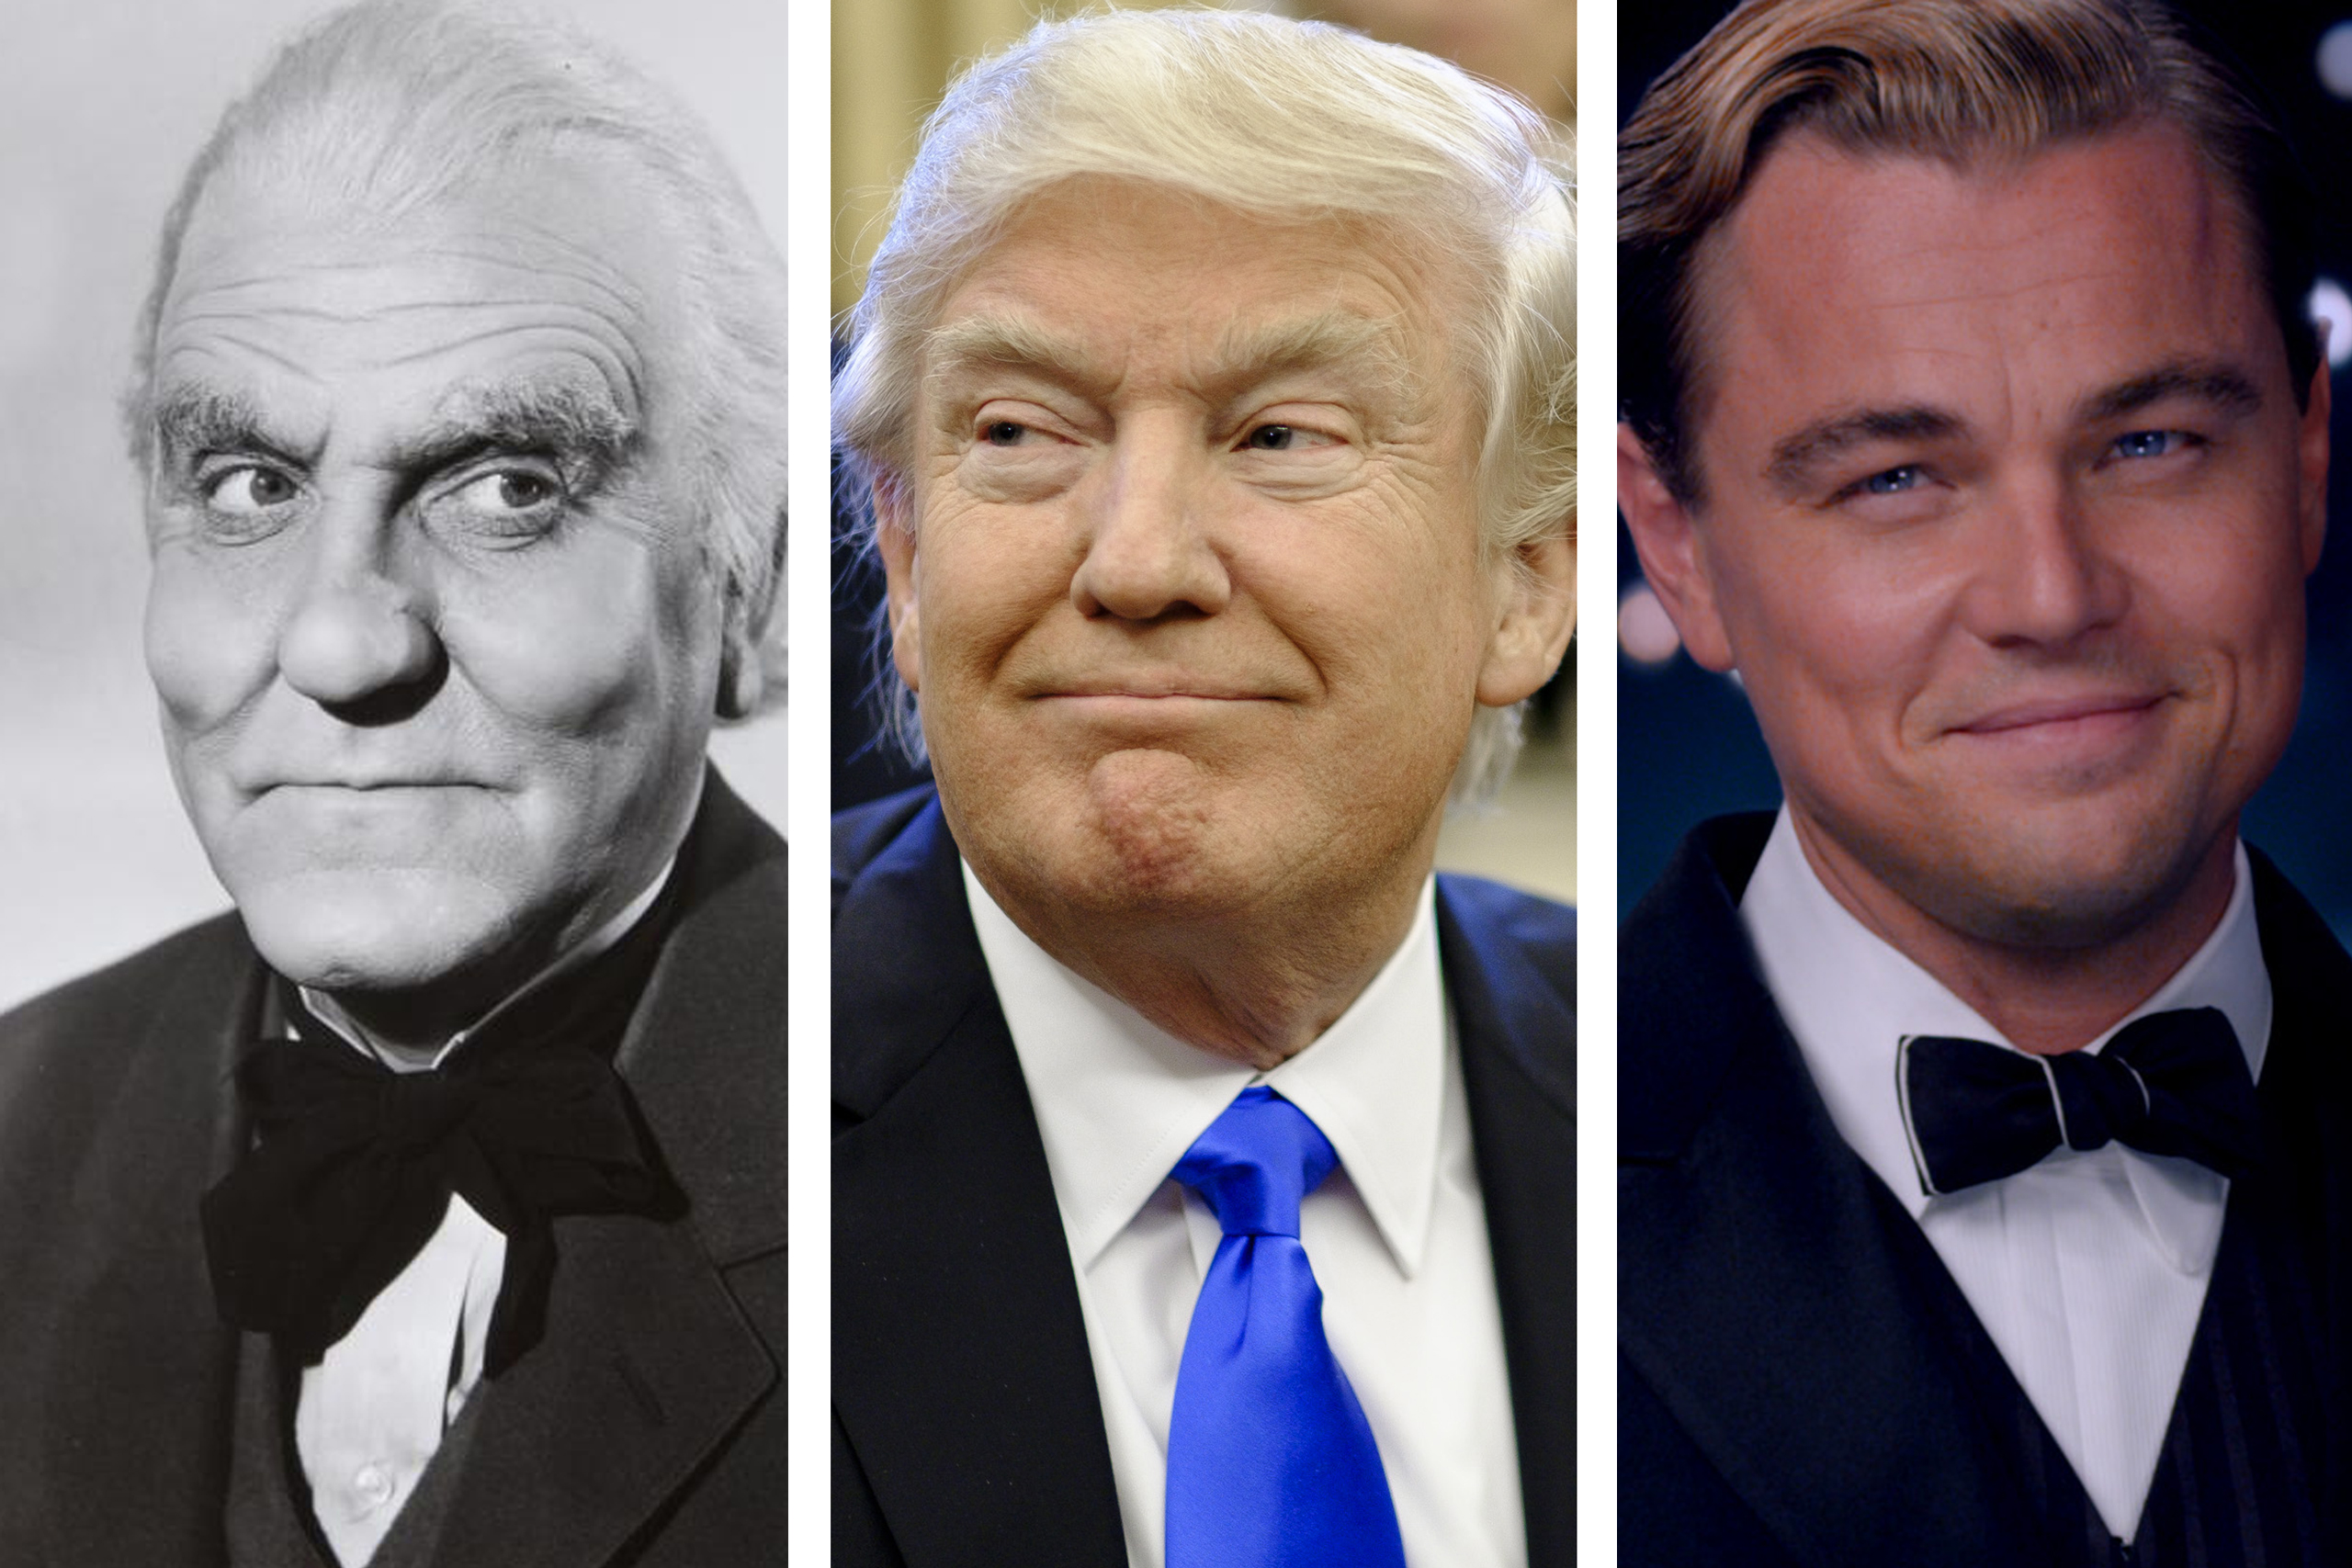 From left: Frank Morgan in <i>The Wizard of Oz</i>; President Donald Trump; Leonardo di Caprio in <i>The Great Gatsby</i>. (Metro-Goldwyn-Mayer; Pete Marovich—Bloomberg/Getty Images; Warner Brothers)